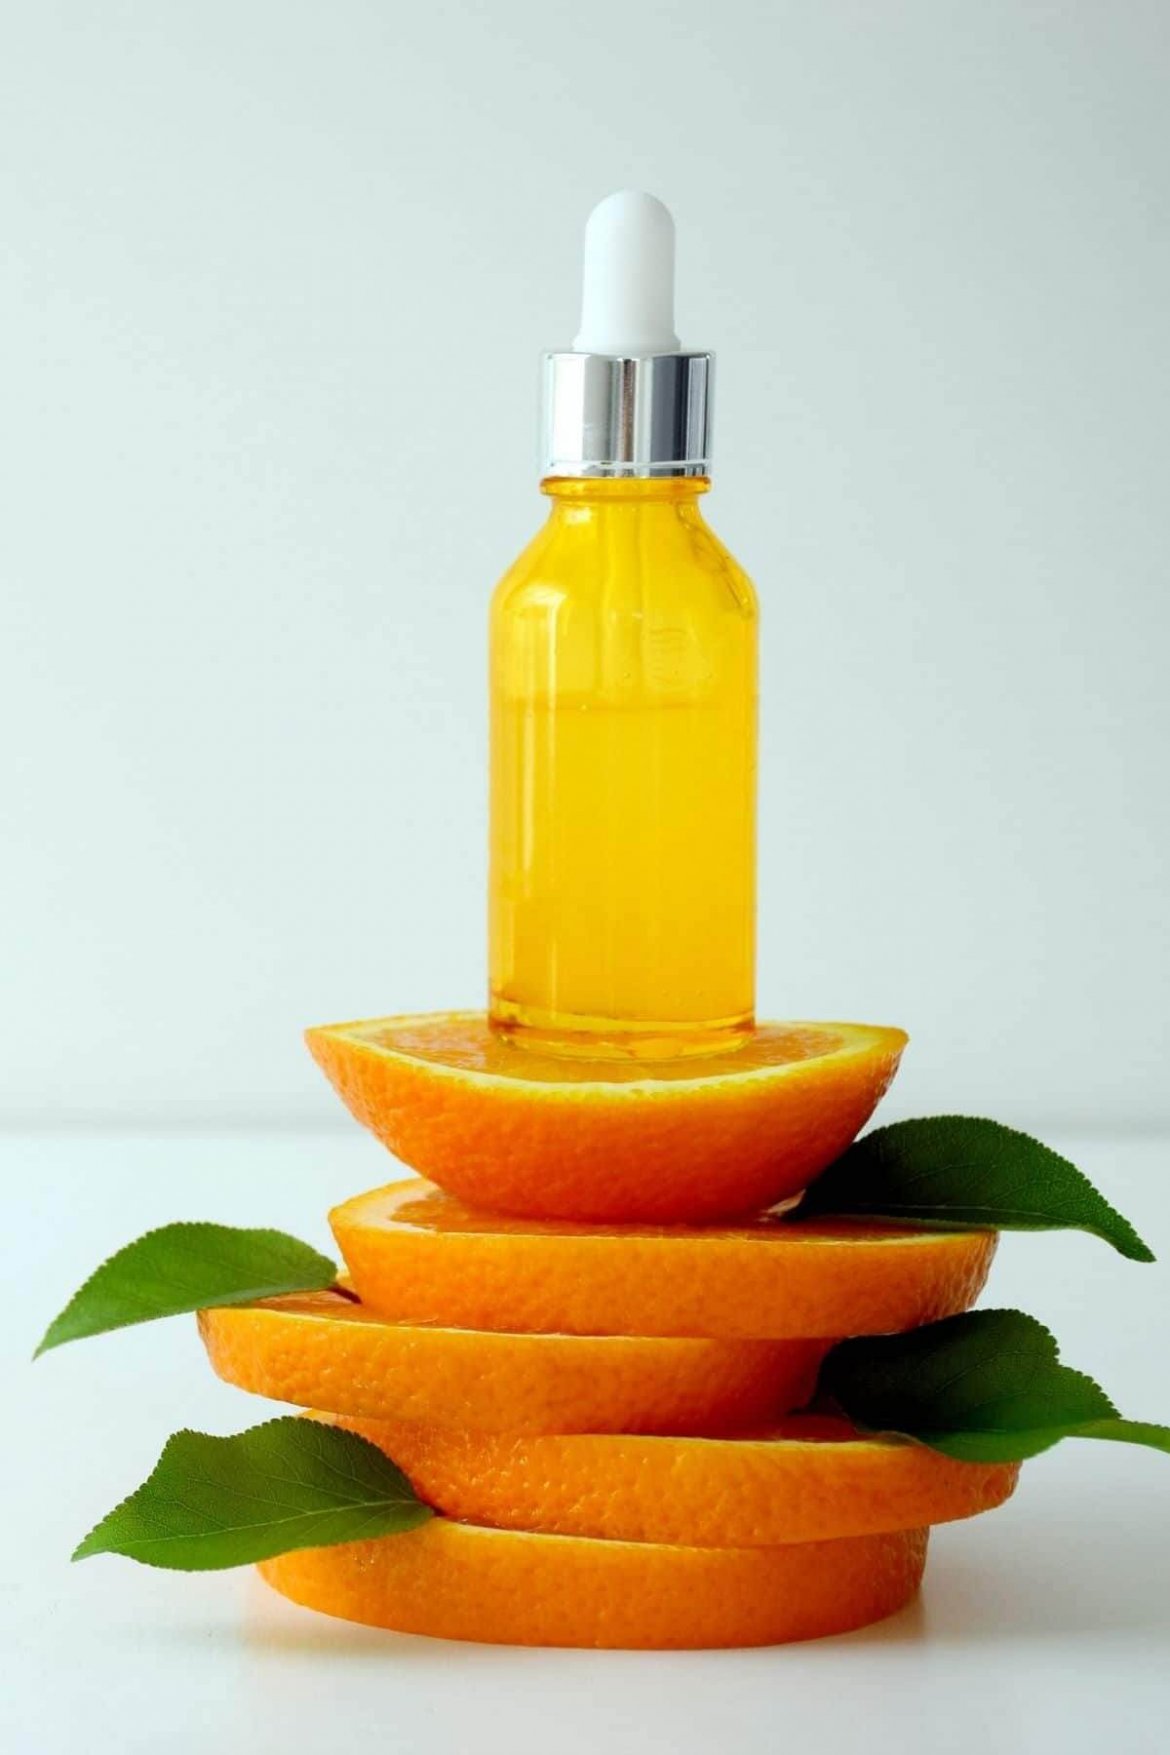 39-Exciting-Things-To-Do-With-Orange-Peels.jpg